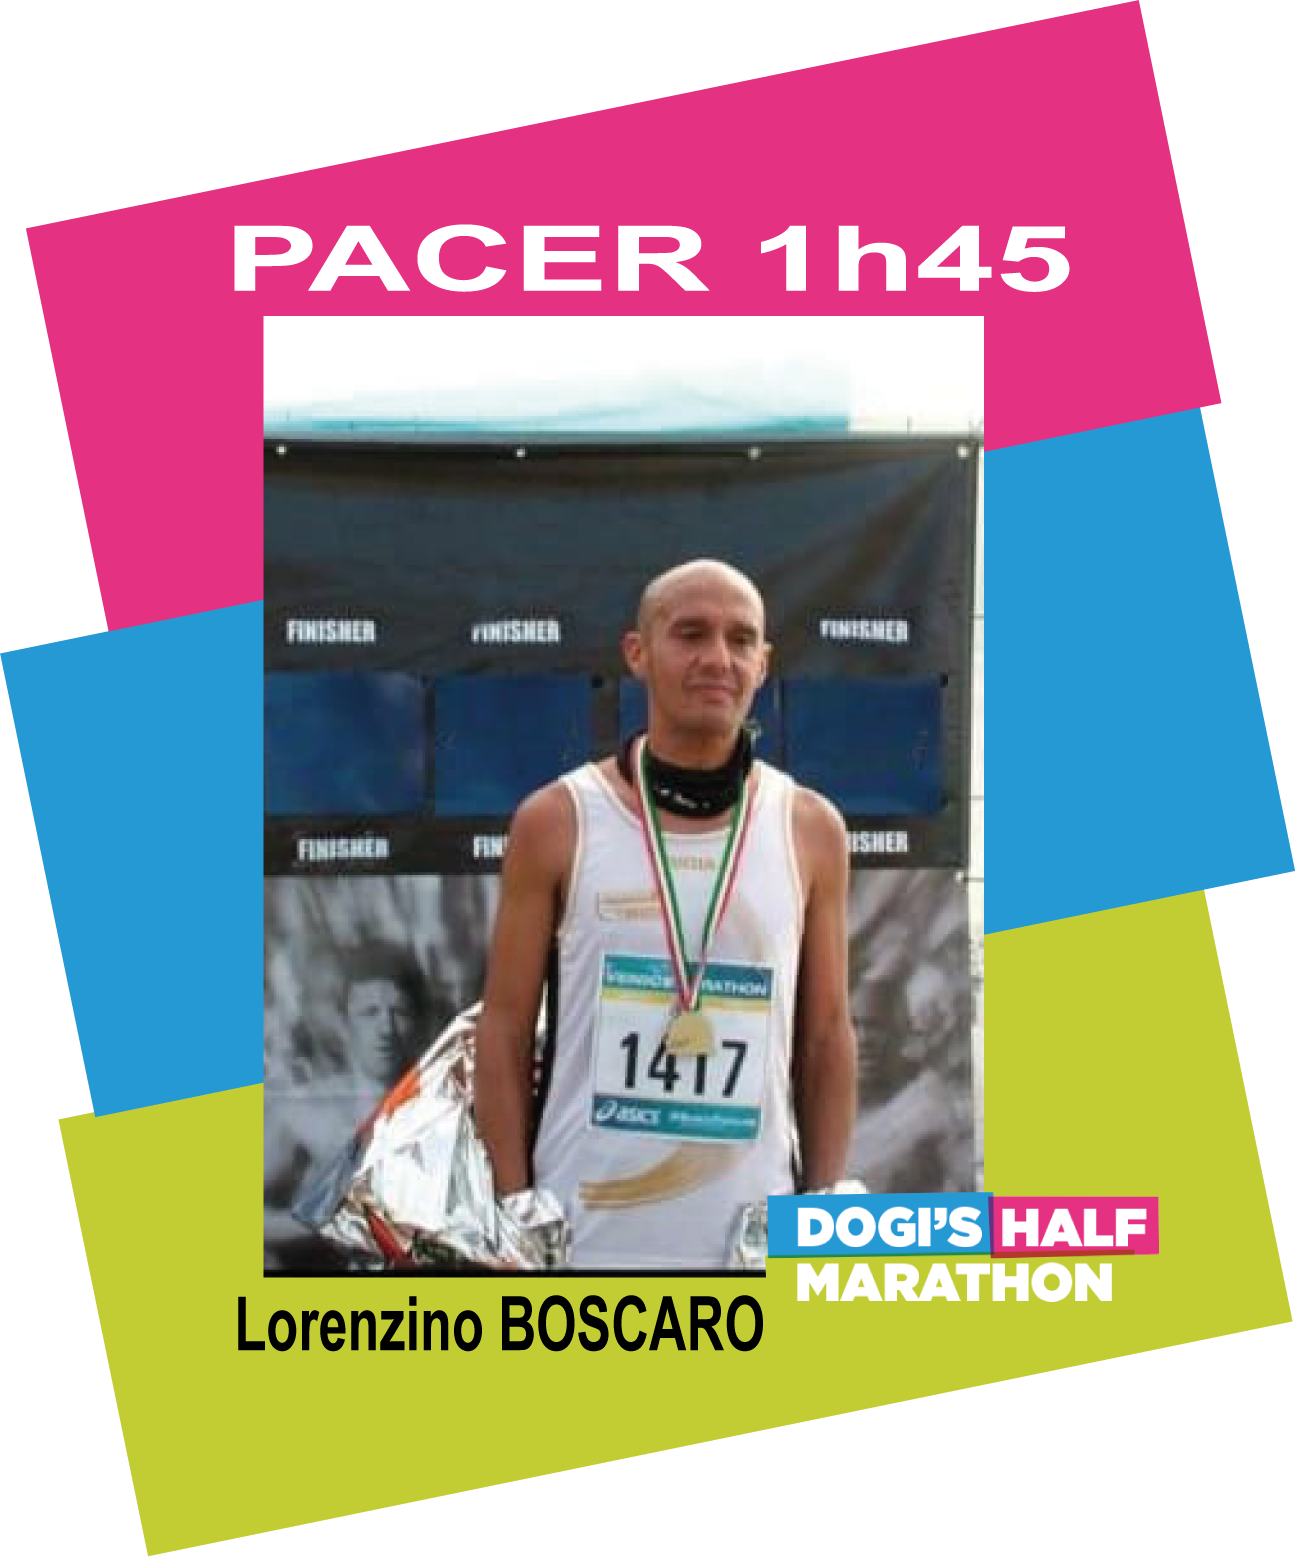 Pacer 1h45